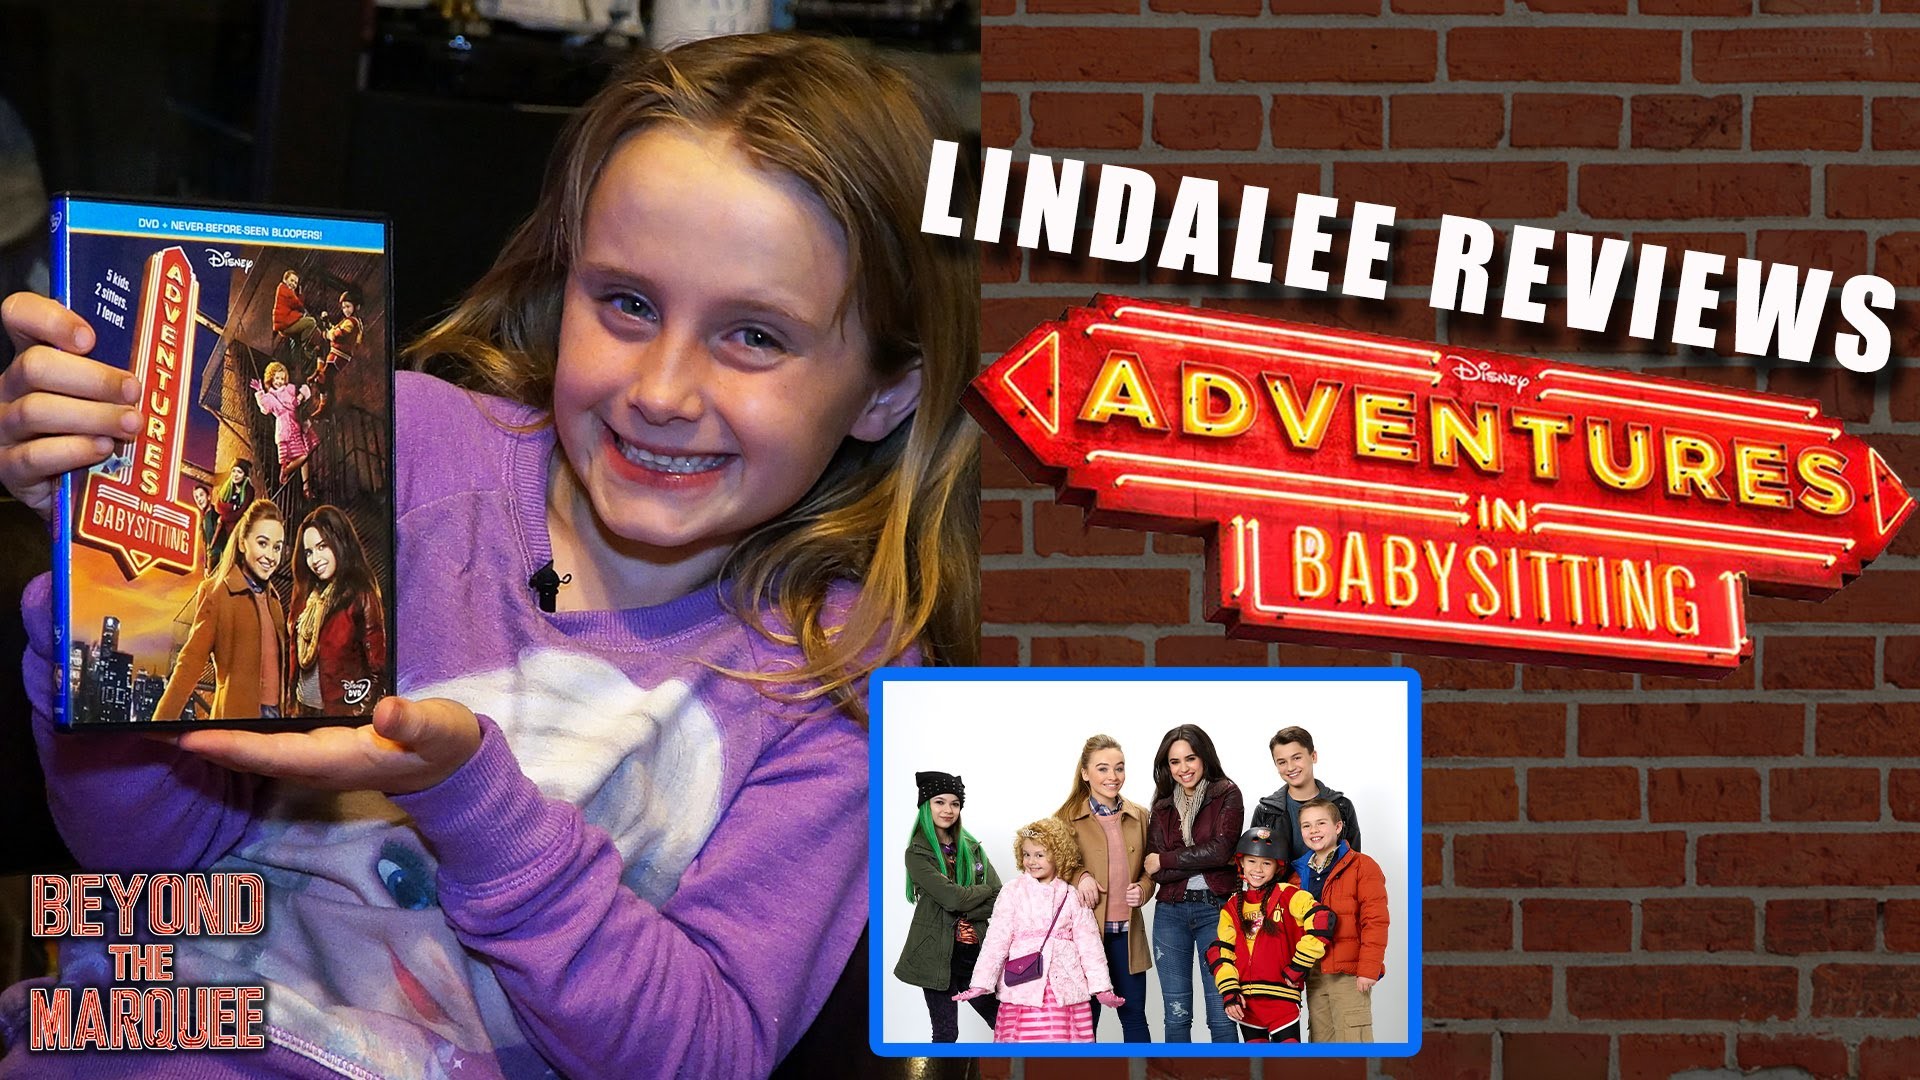 1920x1080 Lindalee Reviews Adventures in Babysitting on DVD - Disney Channel 2016 -  YouTube